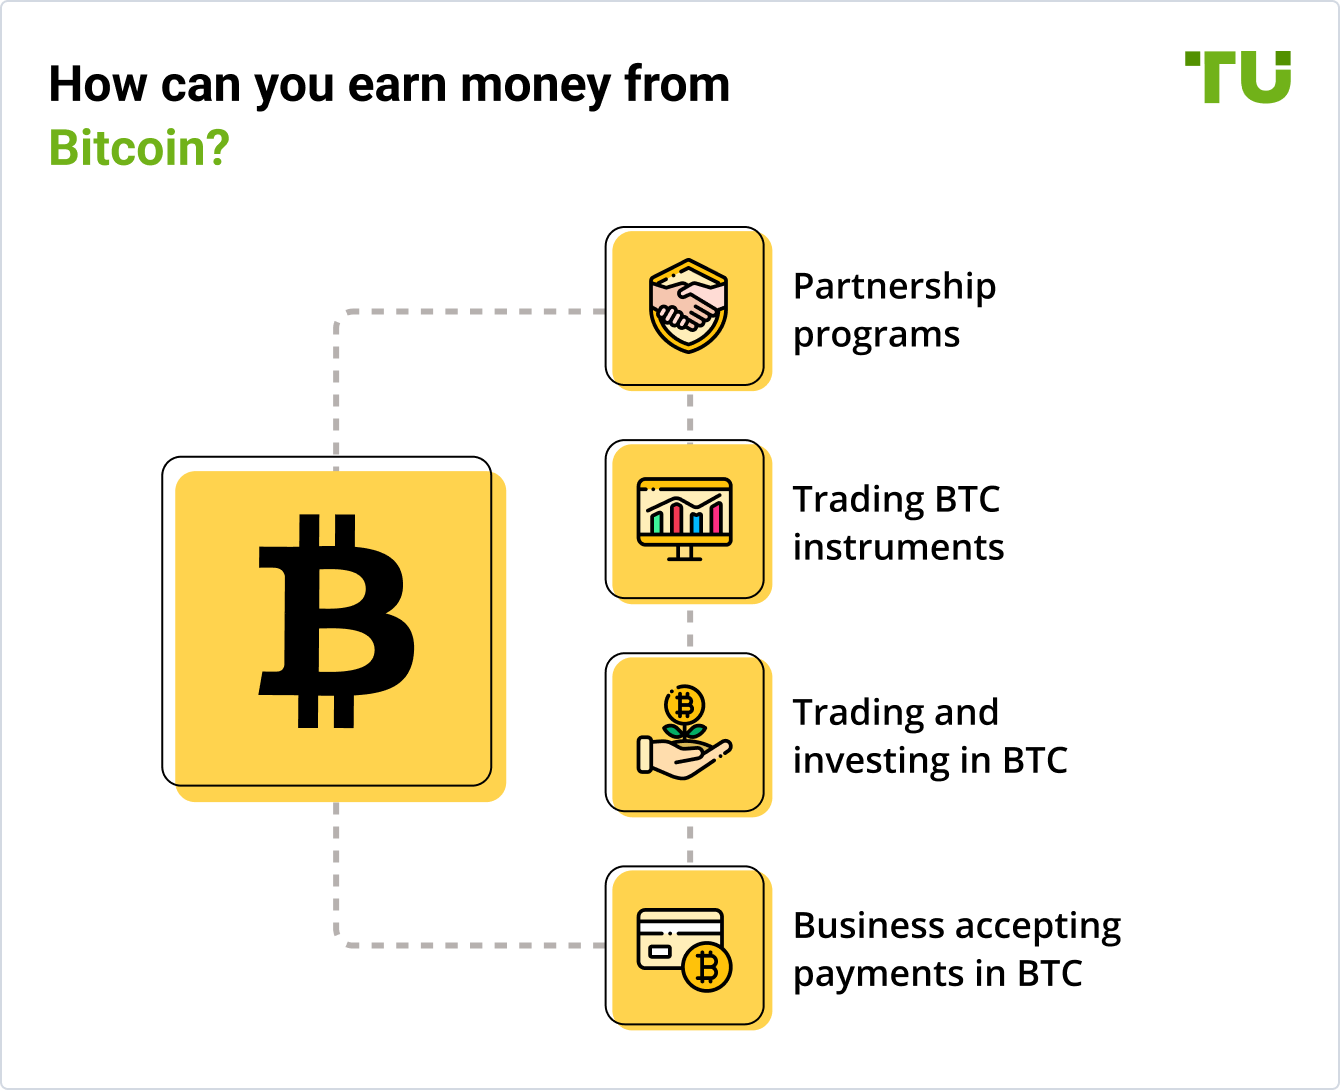 How can you earn money from Bitcoin?